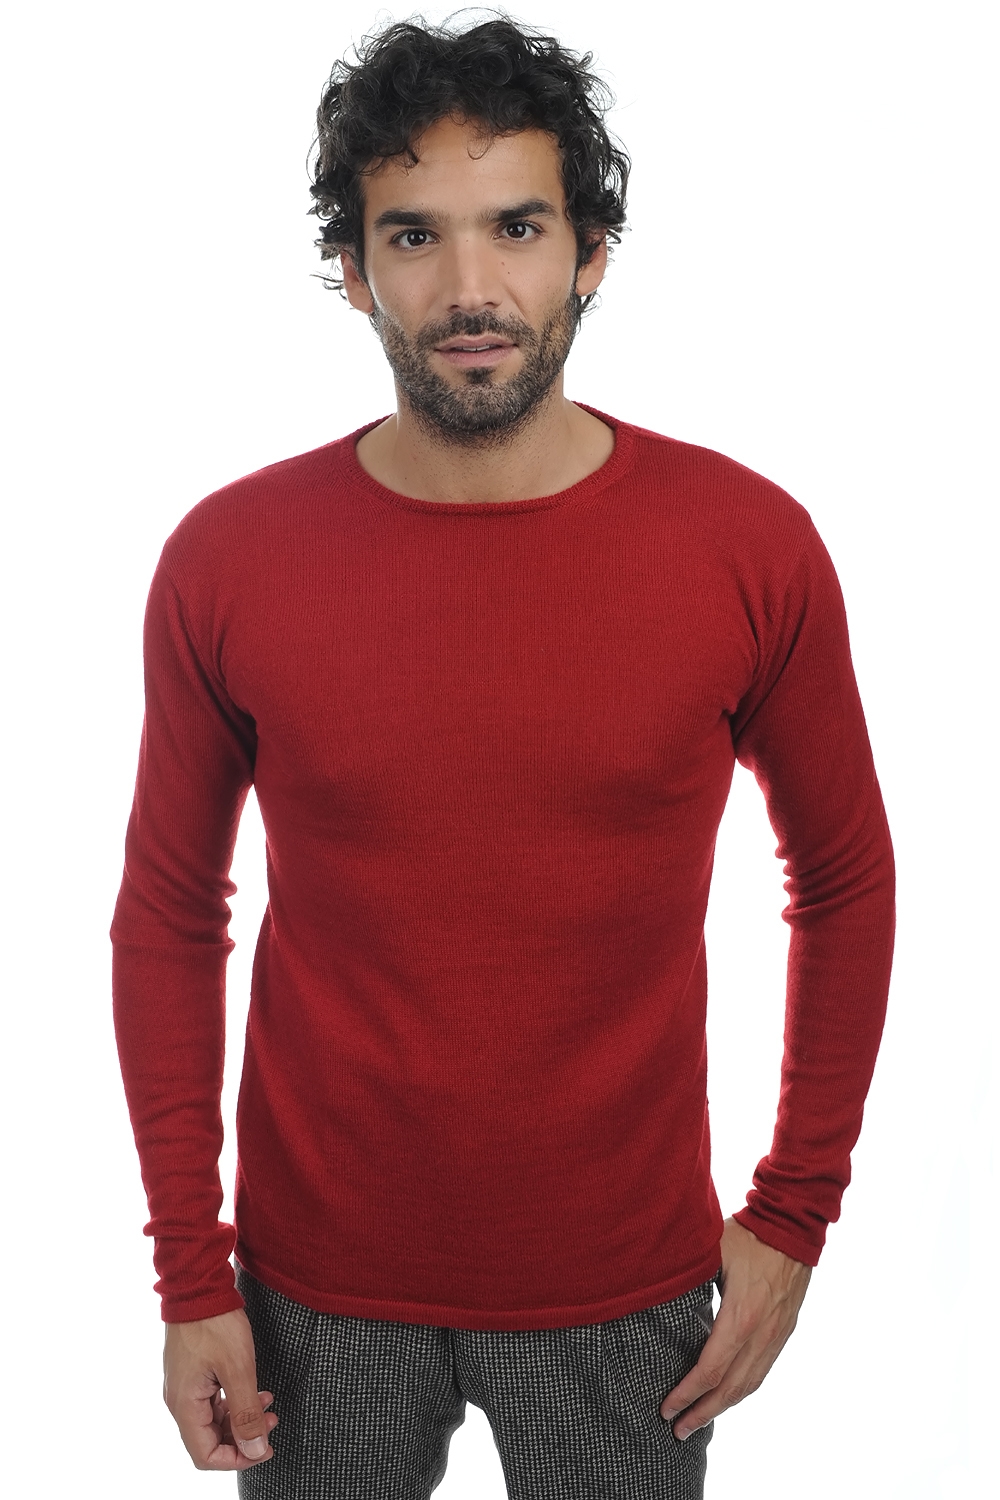 Baby Alpaga pull homme christian rouge 3xl